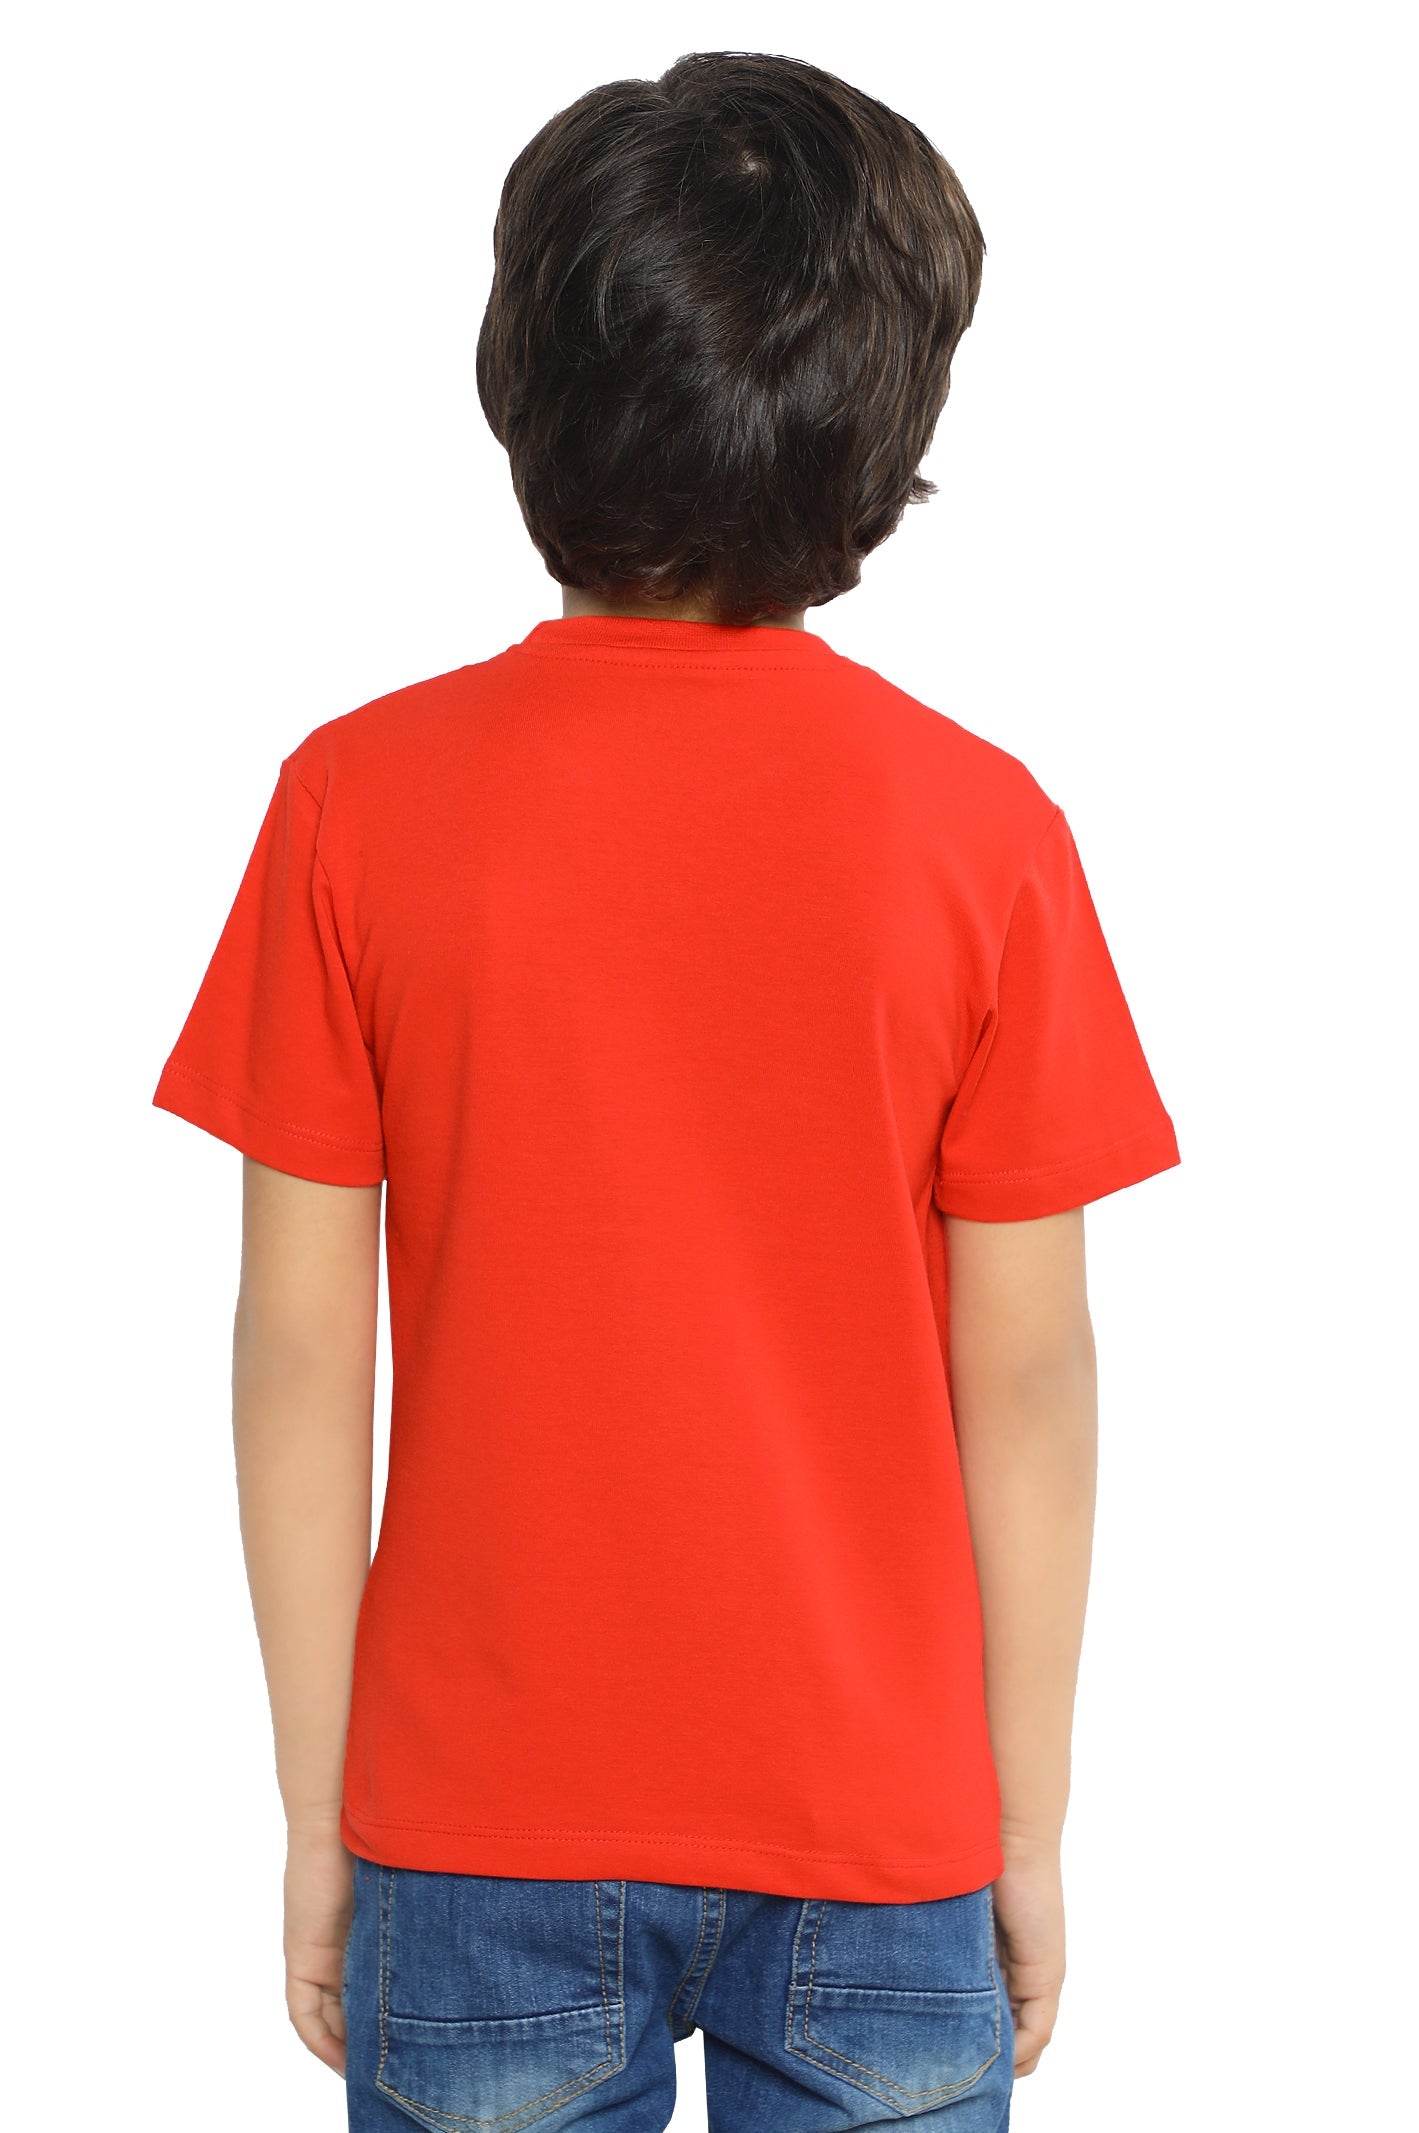 Boys Round Neck T-Shirt SKU: KBA-0437-RED - Diners